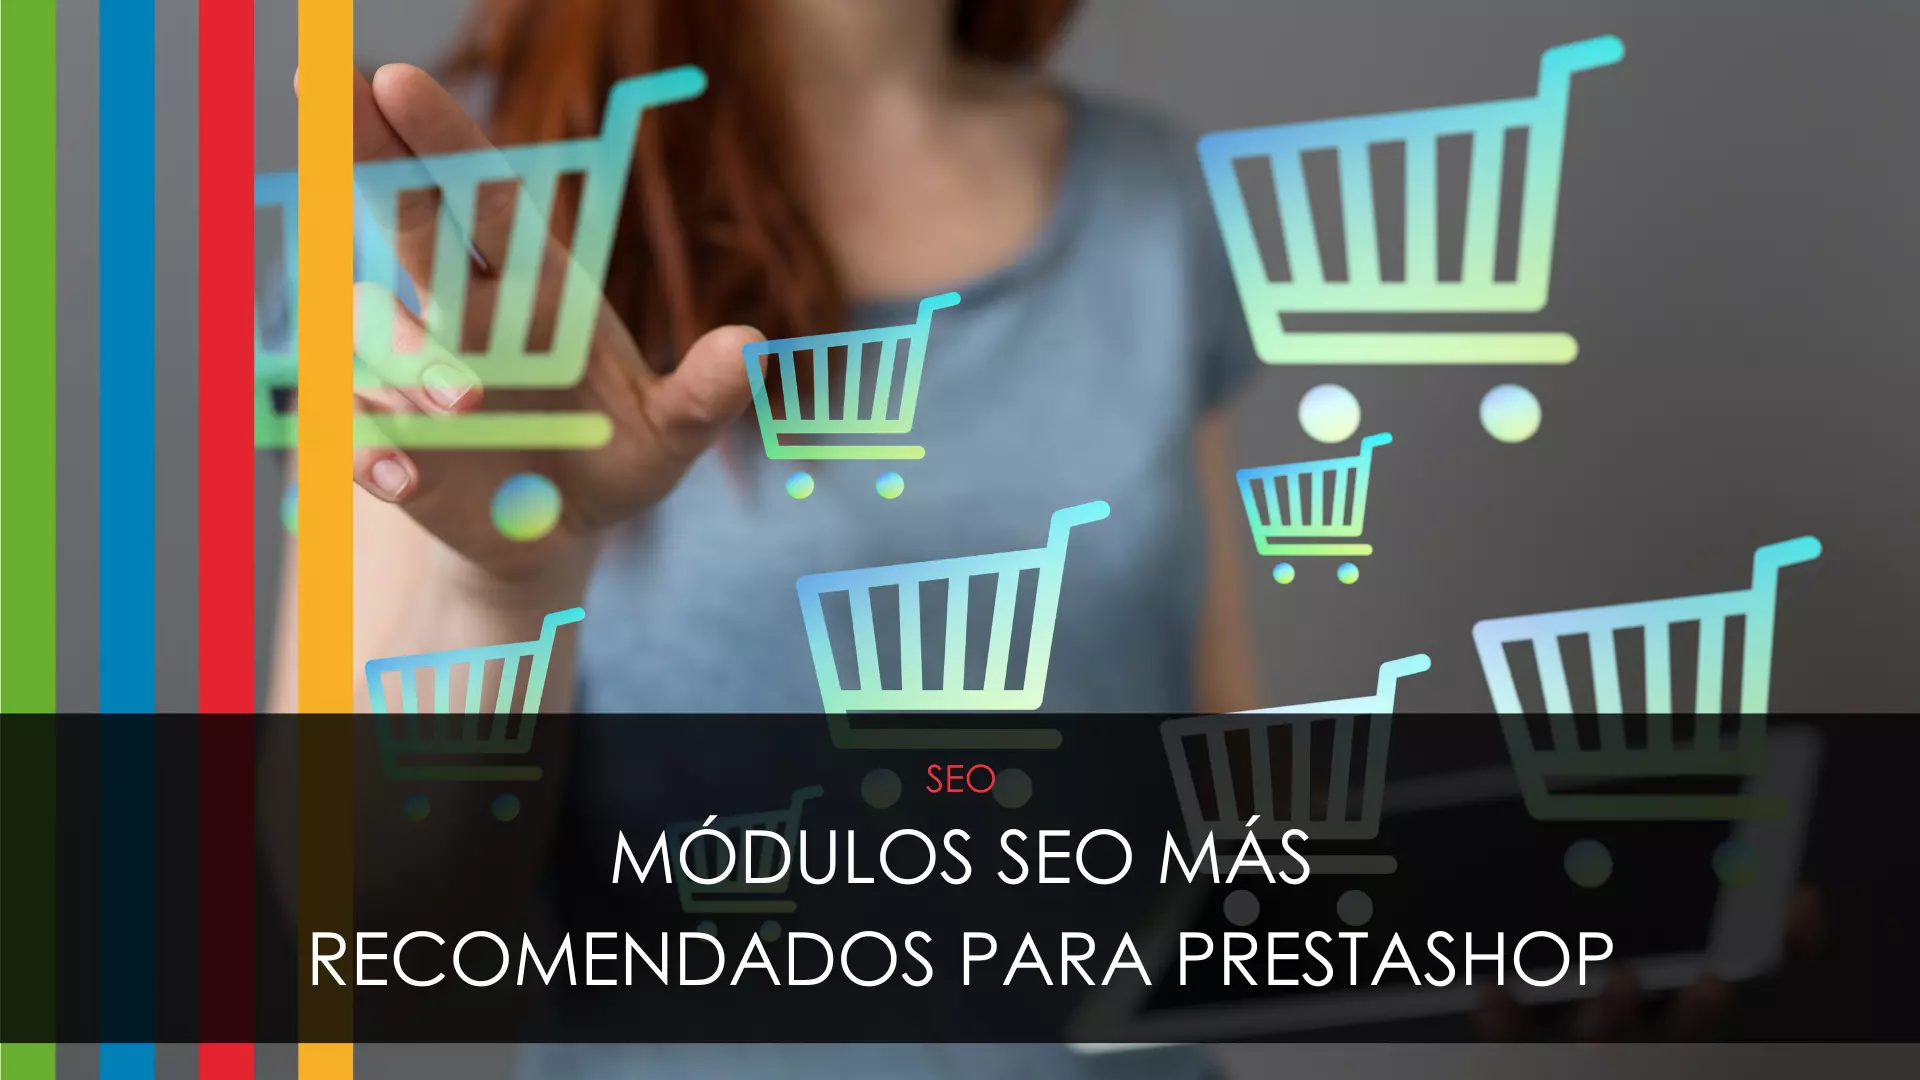 The 7 recommended SEO modules for PrestaShop.